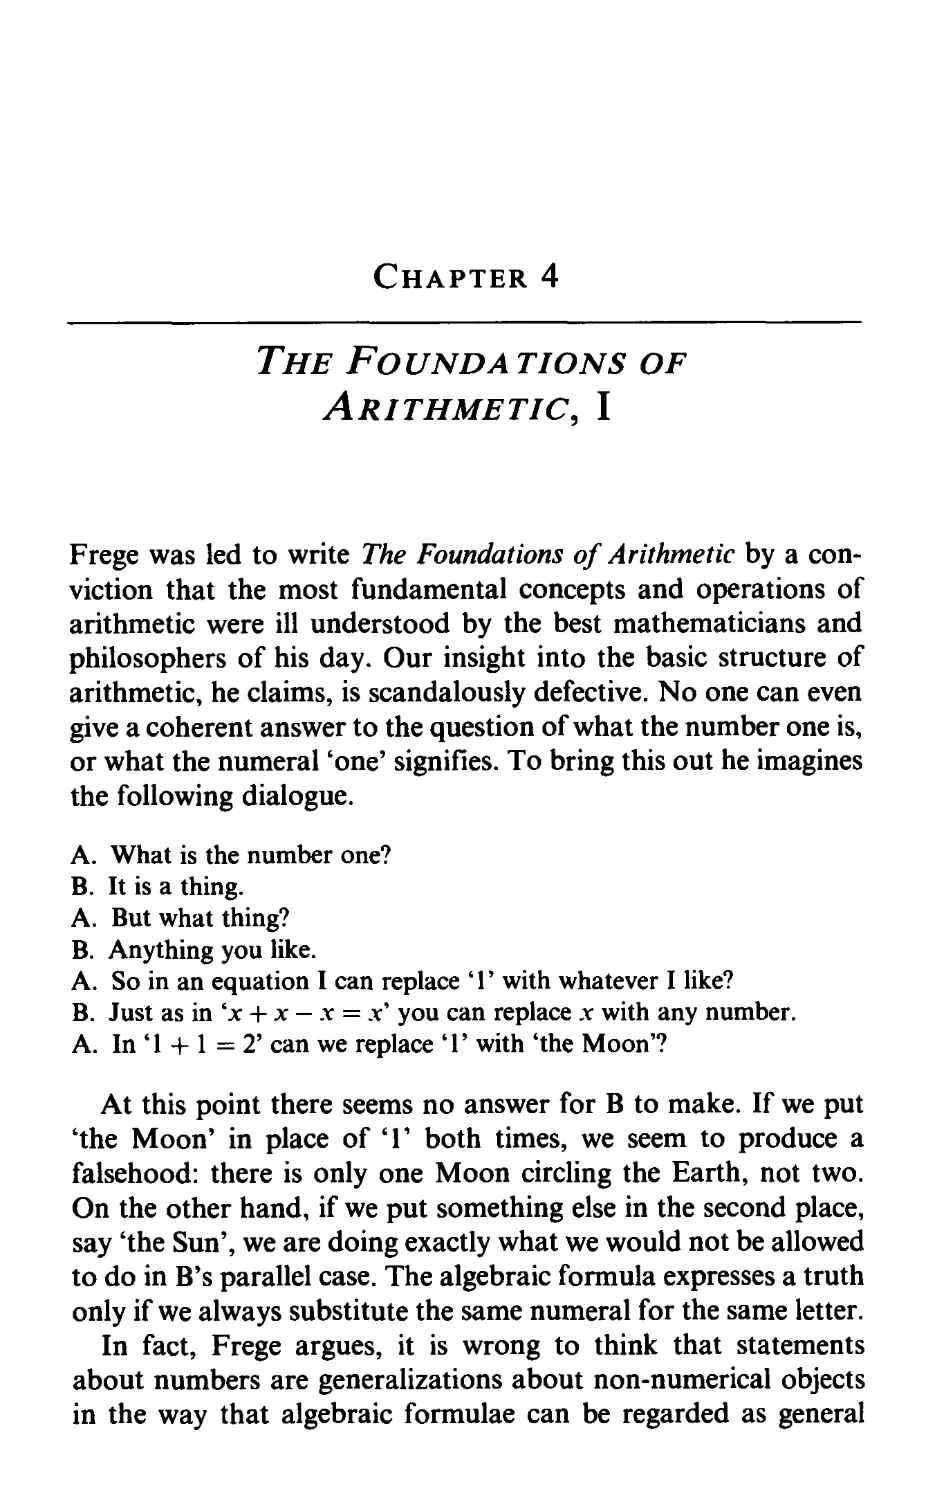 4 The Foundations of Arithmetic, I